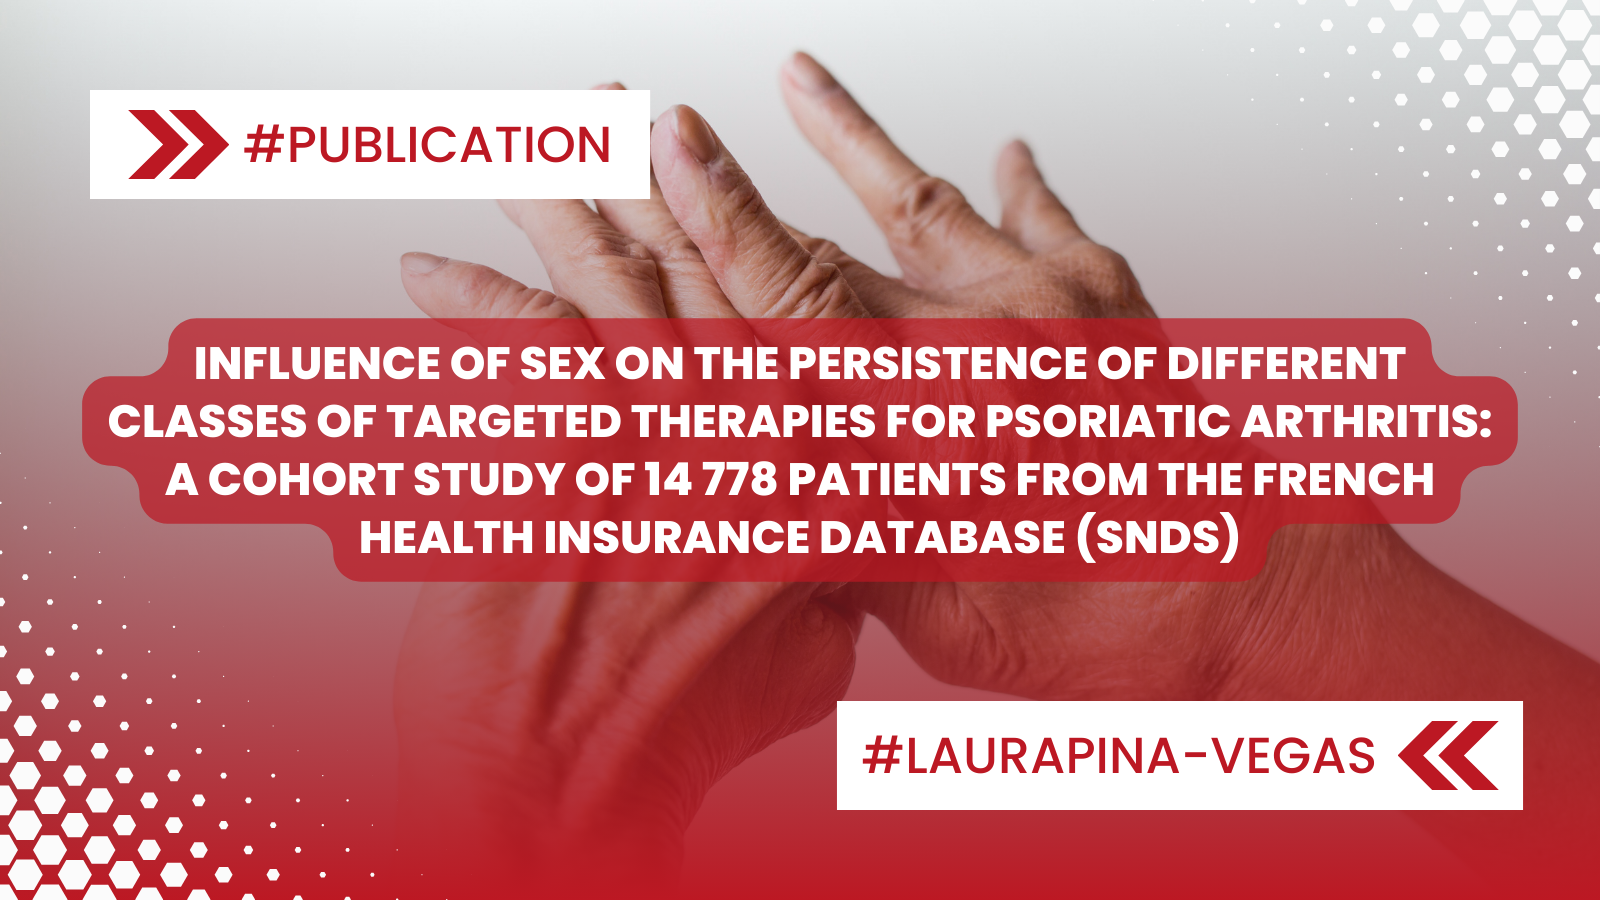 Influence of sex on the persistence of different classes of targeted therapies for psoriatic arthritis: a cohort study of 14 778 patients from the French health insurance database (SNDS)